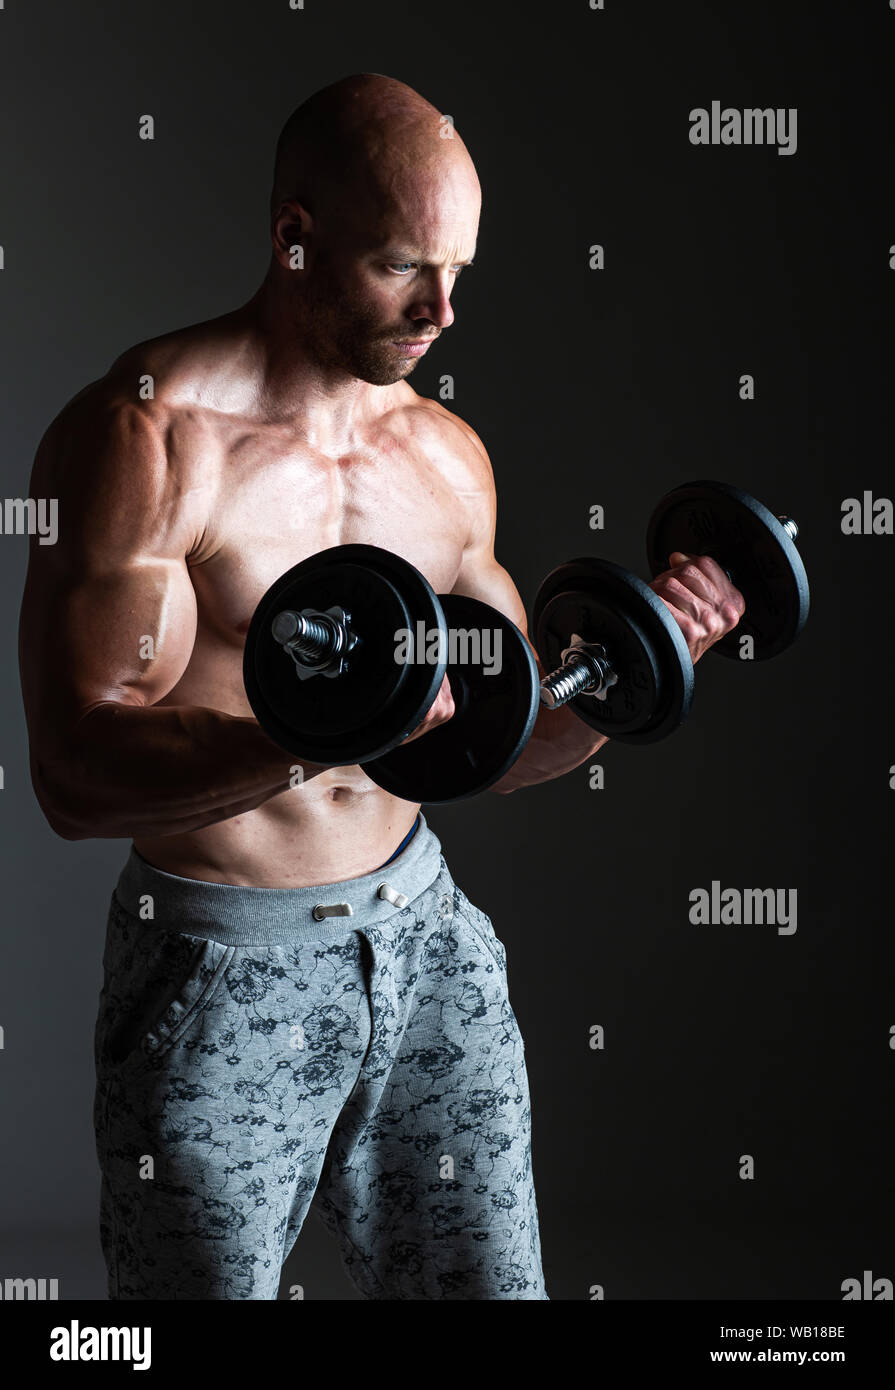 Strong young man bodybuilder performing exercise for biceps with heavy dumbbell in both hands Concept Artistic Gym Life Style Stock Photo